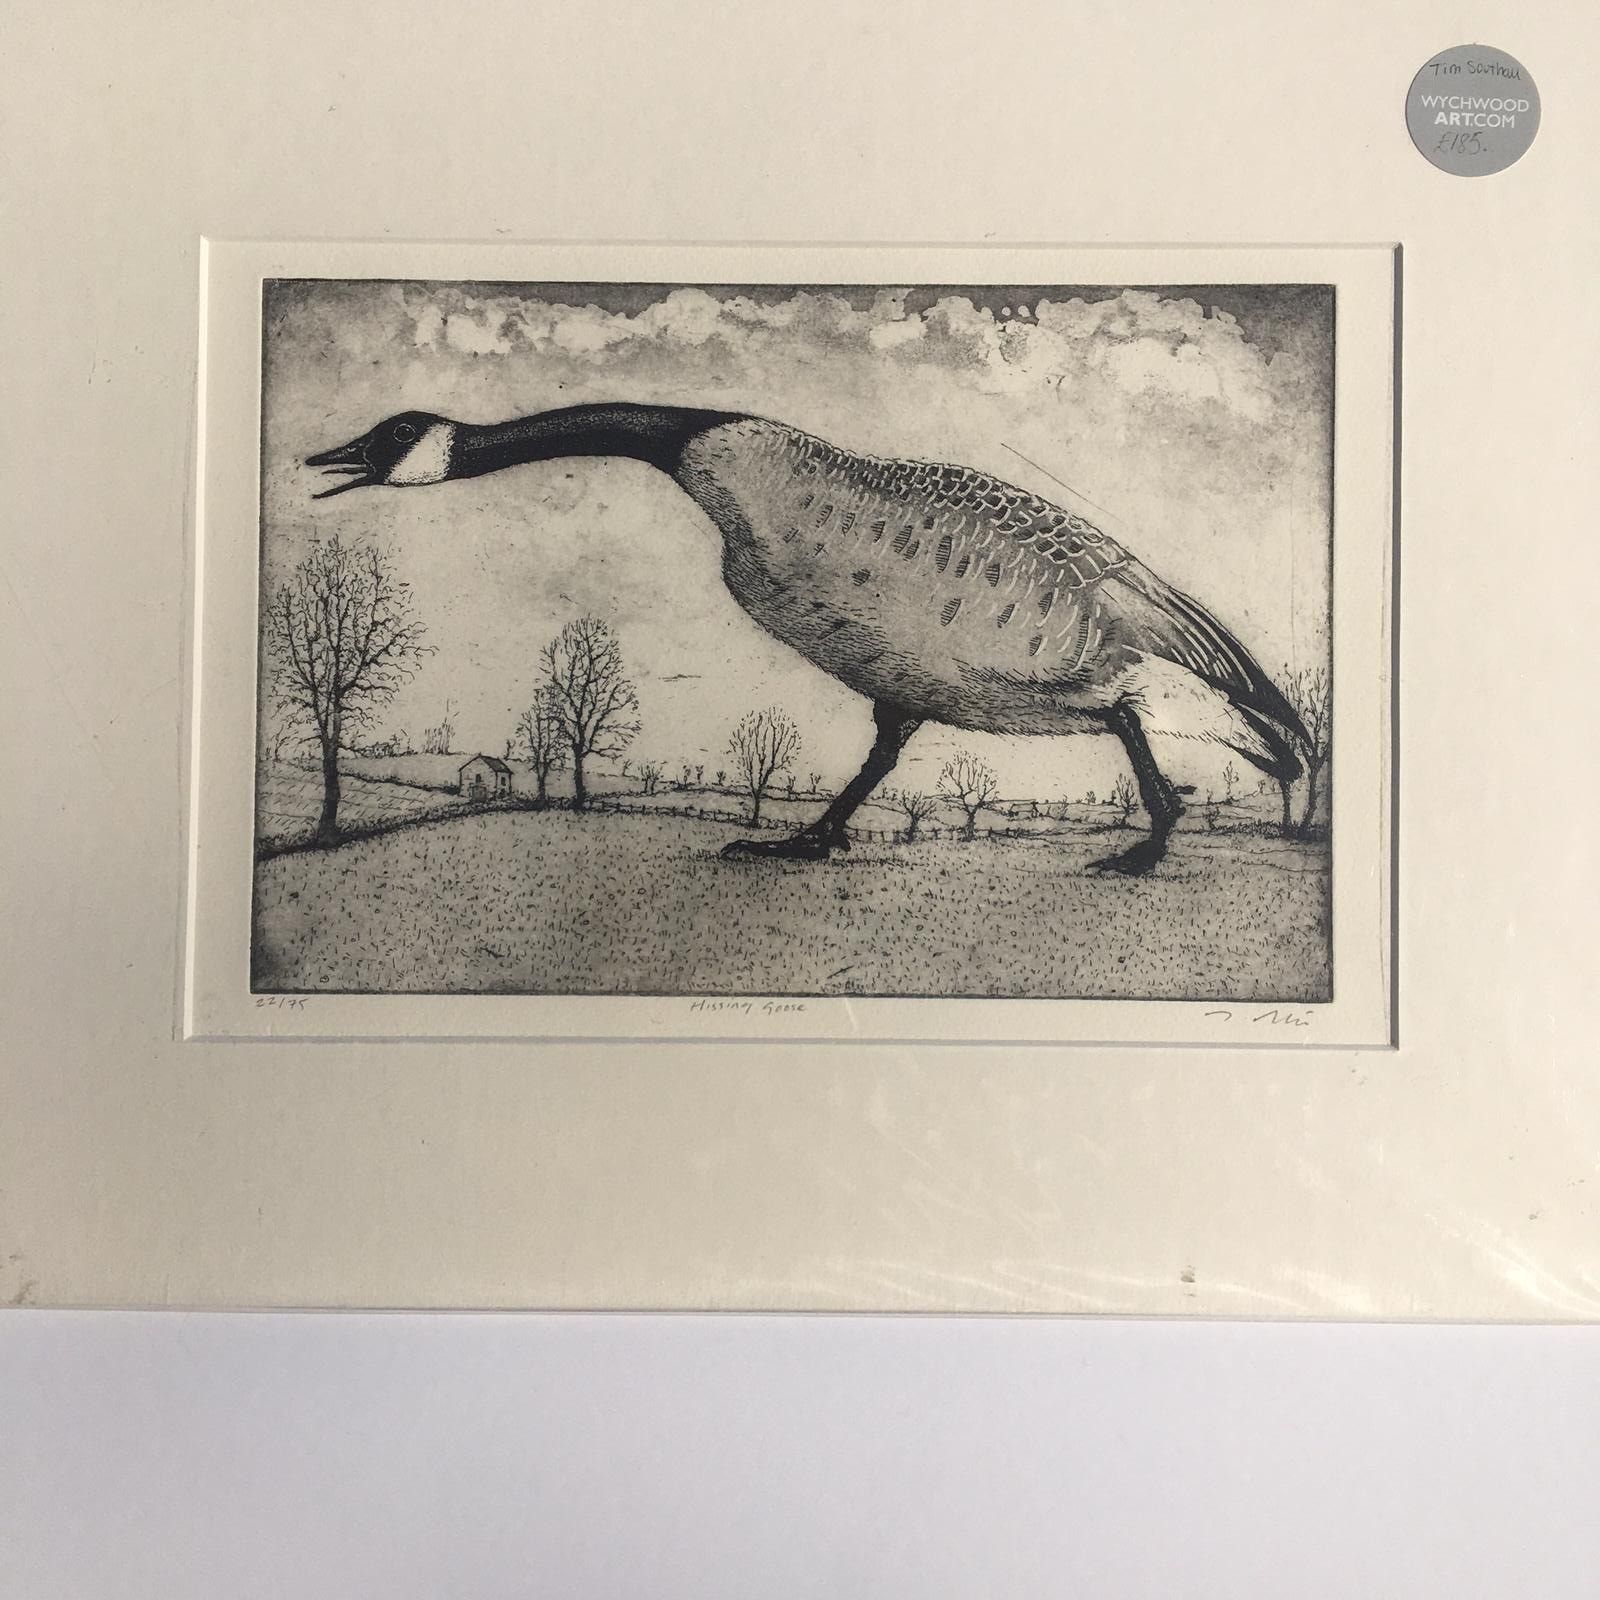 Hissing Goose by Tim Southall - Secondary Image